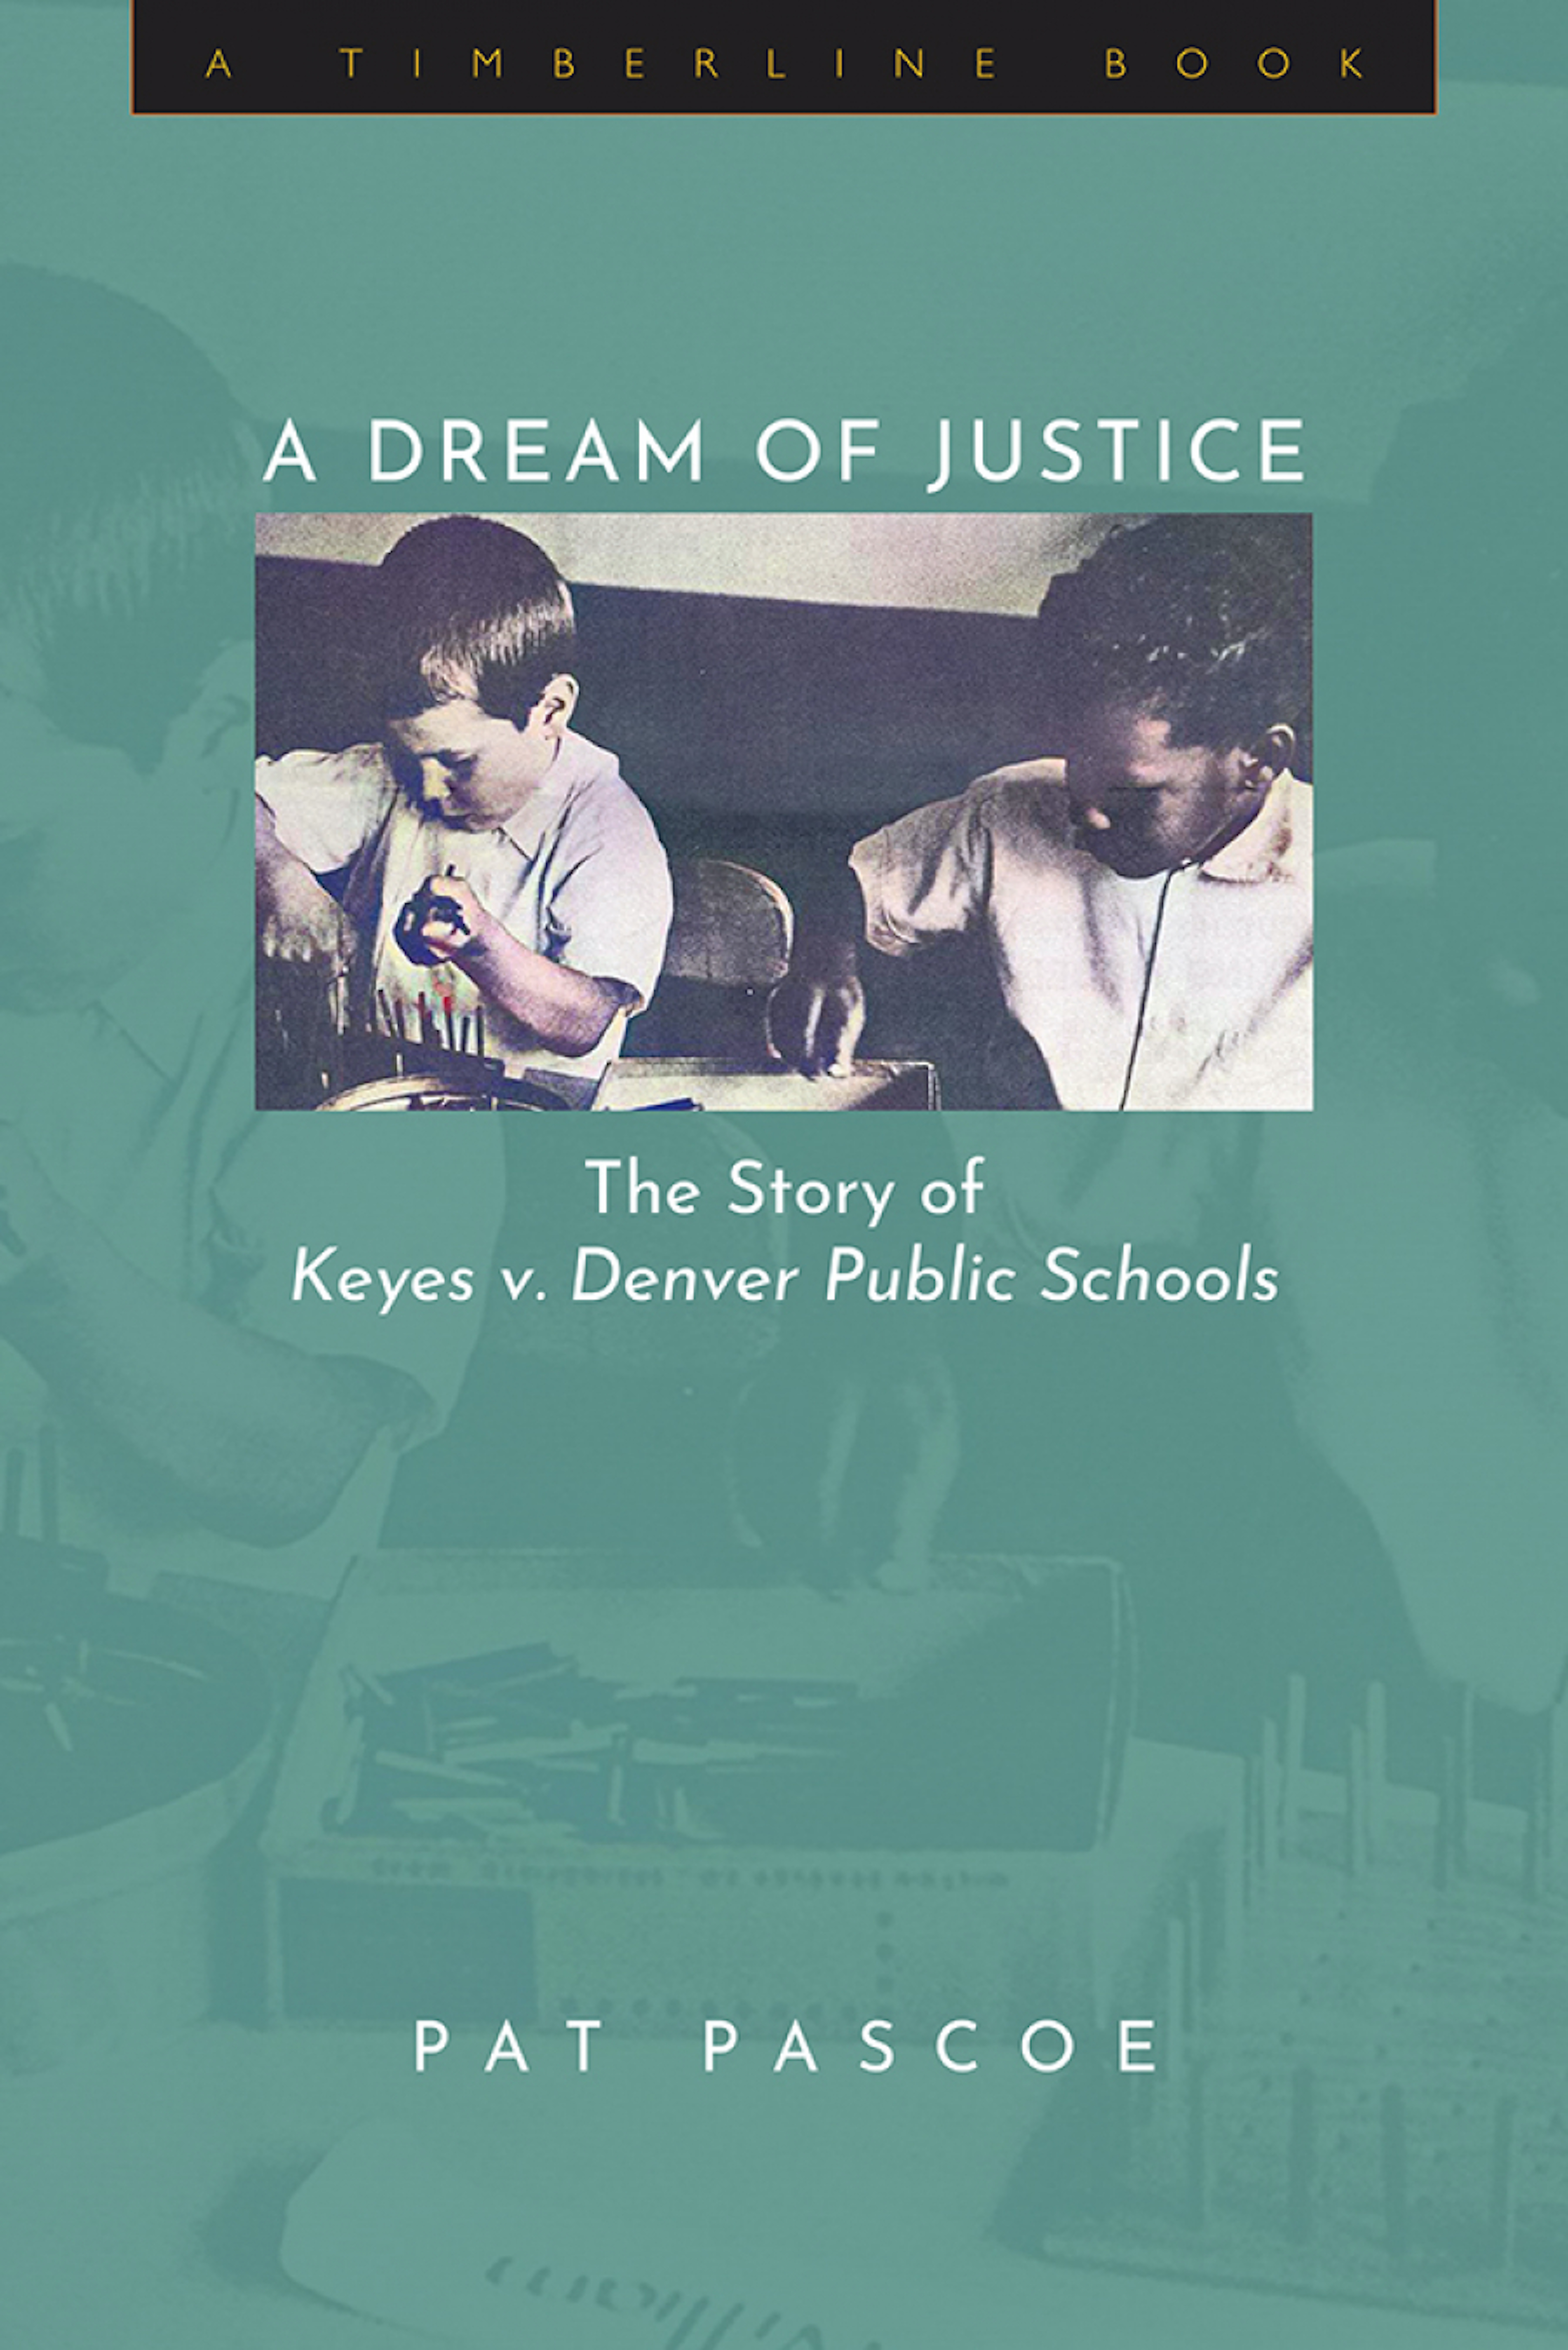 Photo of the cover of a book called "A Dream of Justice: The Story of Keyes v. Denver Public Schools." The cover is a blue color, with white text. In the center of the cover is a black and white image of two boys (one Black and one white) sitting next each other at school desks, drawing or writing. The author's name, Pat Pascoe, is in white text at the center-bottom of the cover.